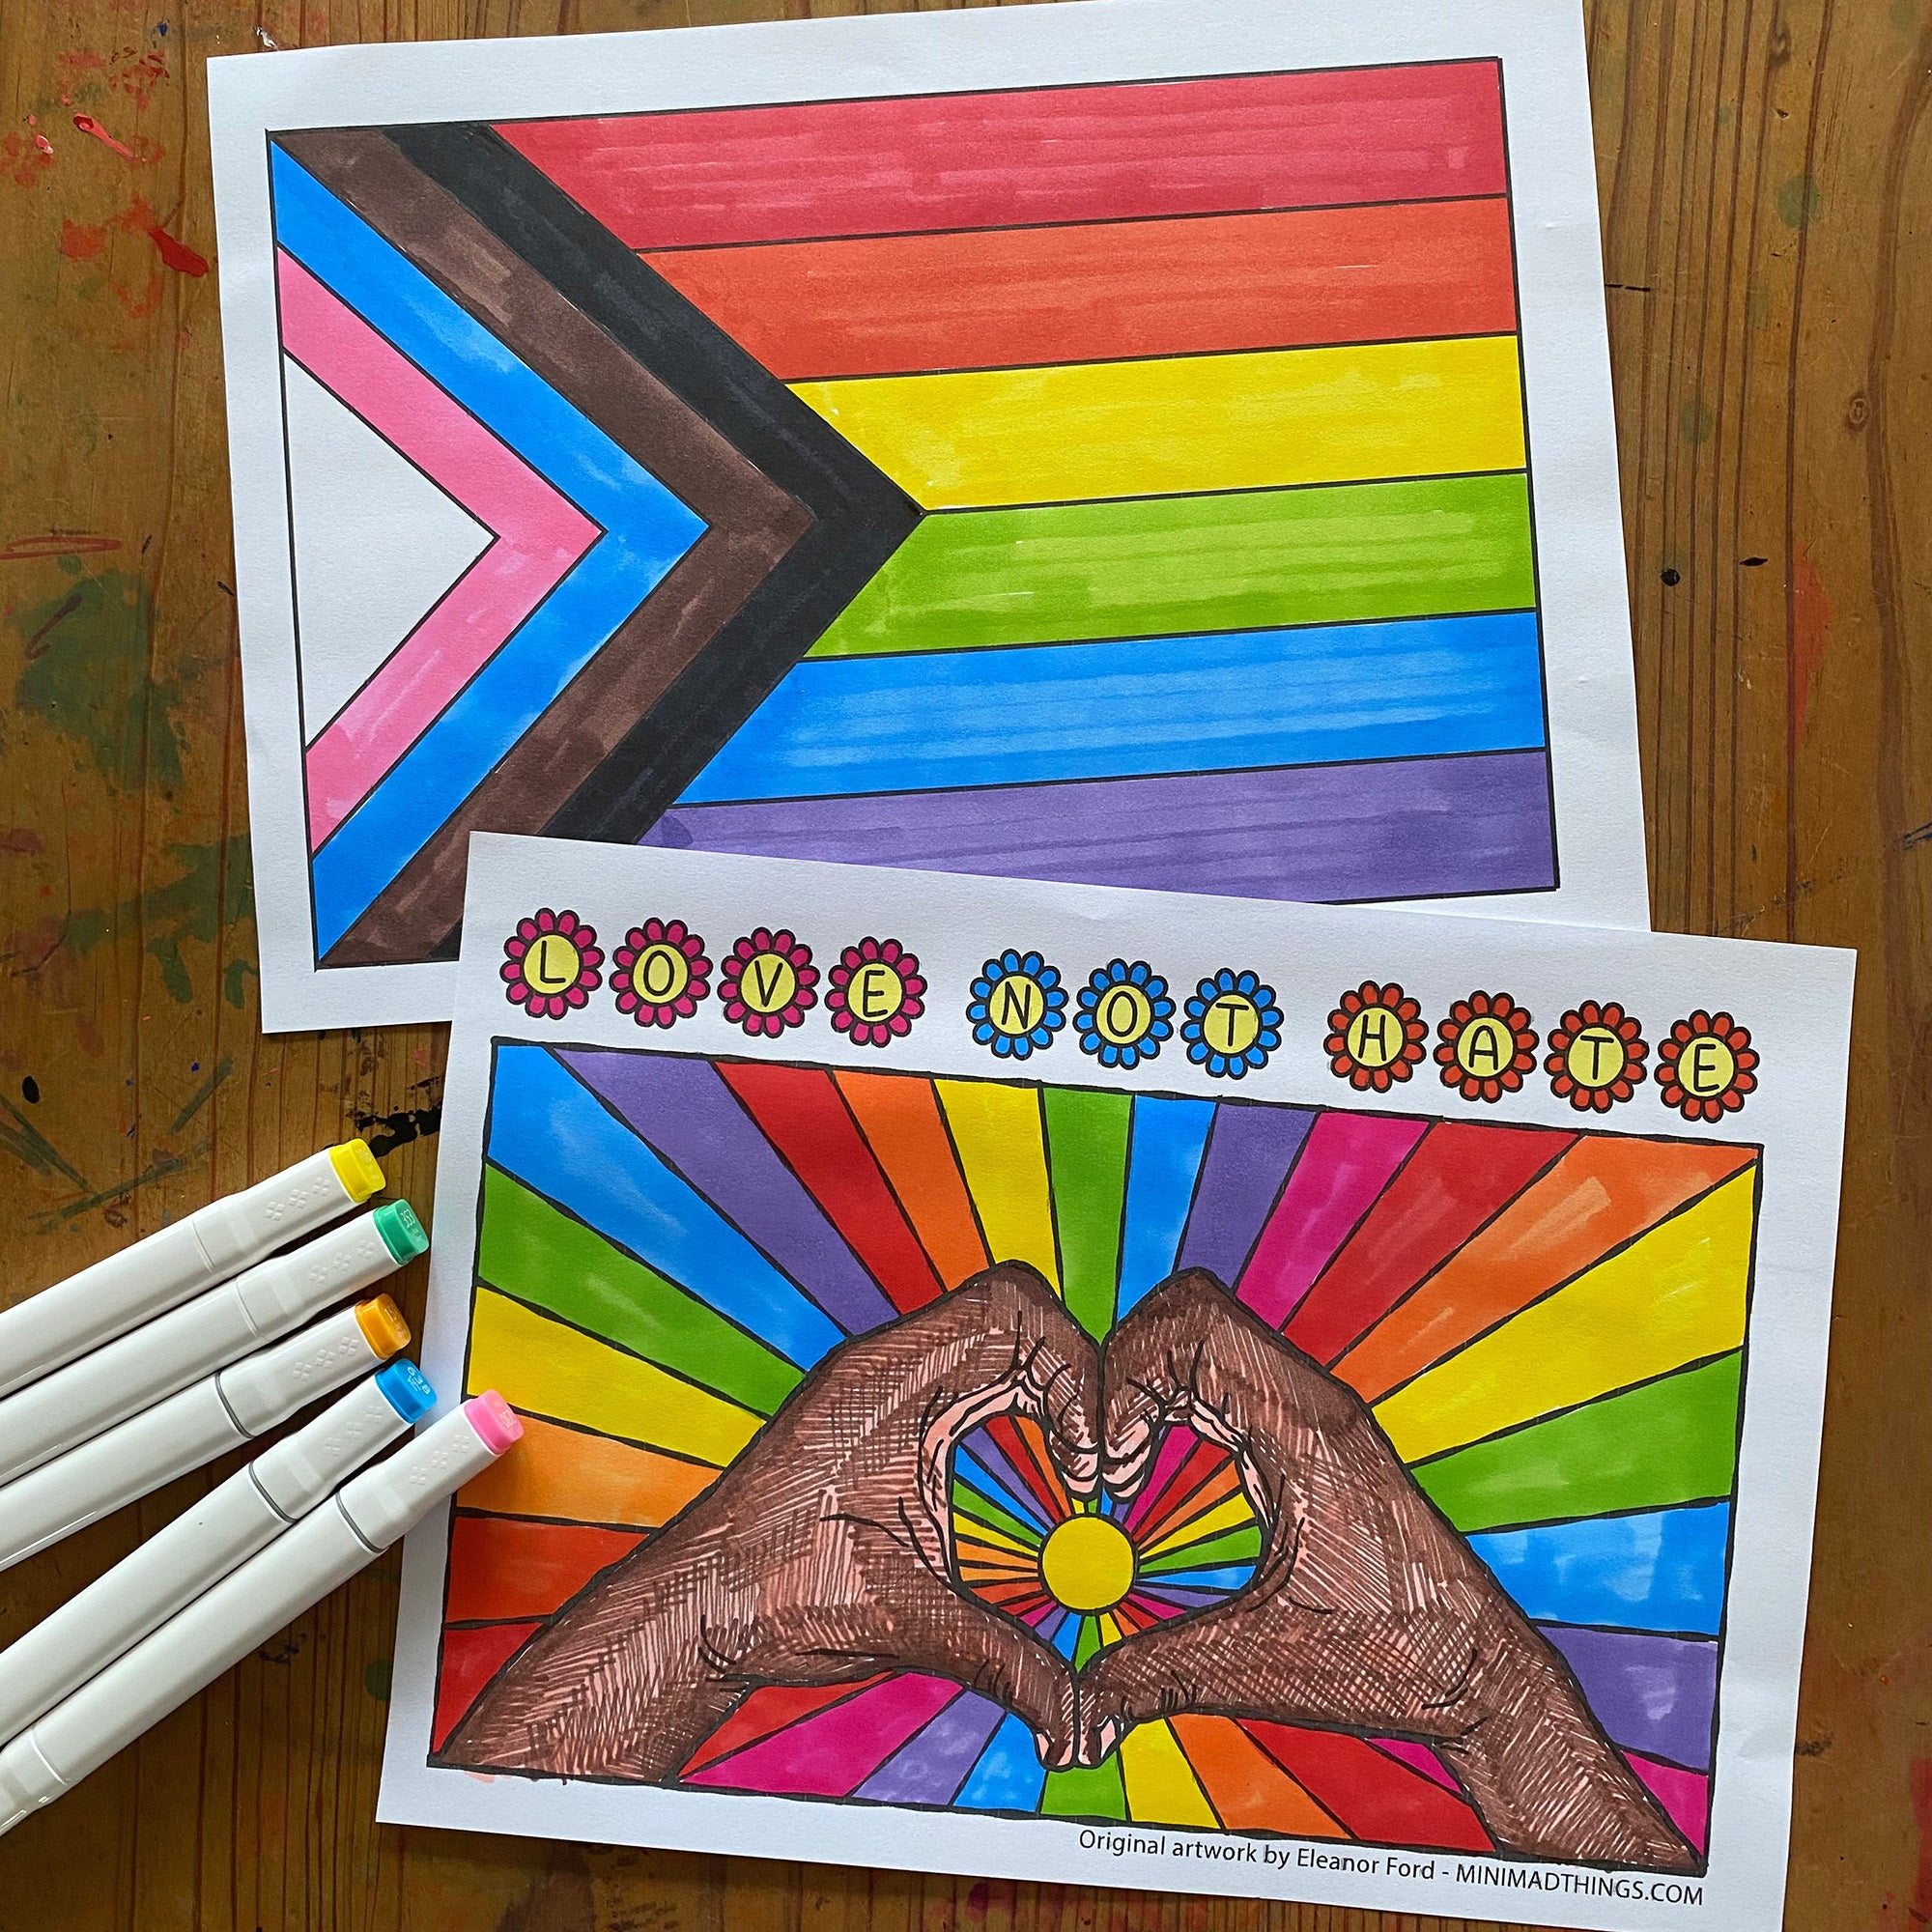 Pride - Colouring in sheets